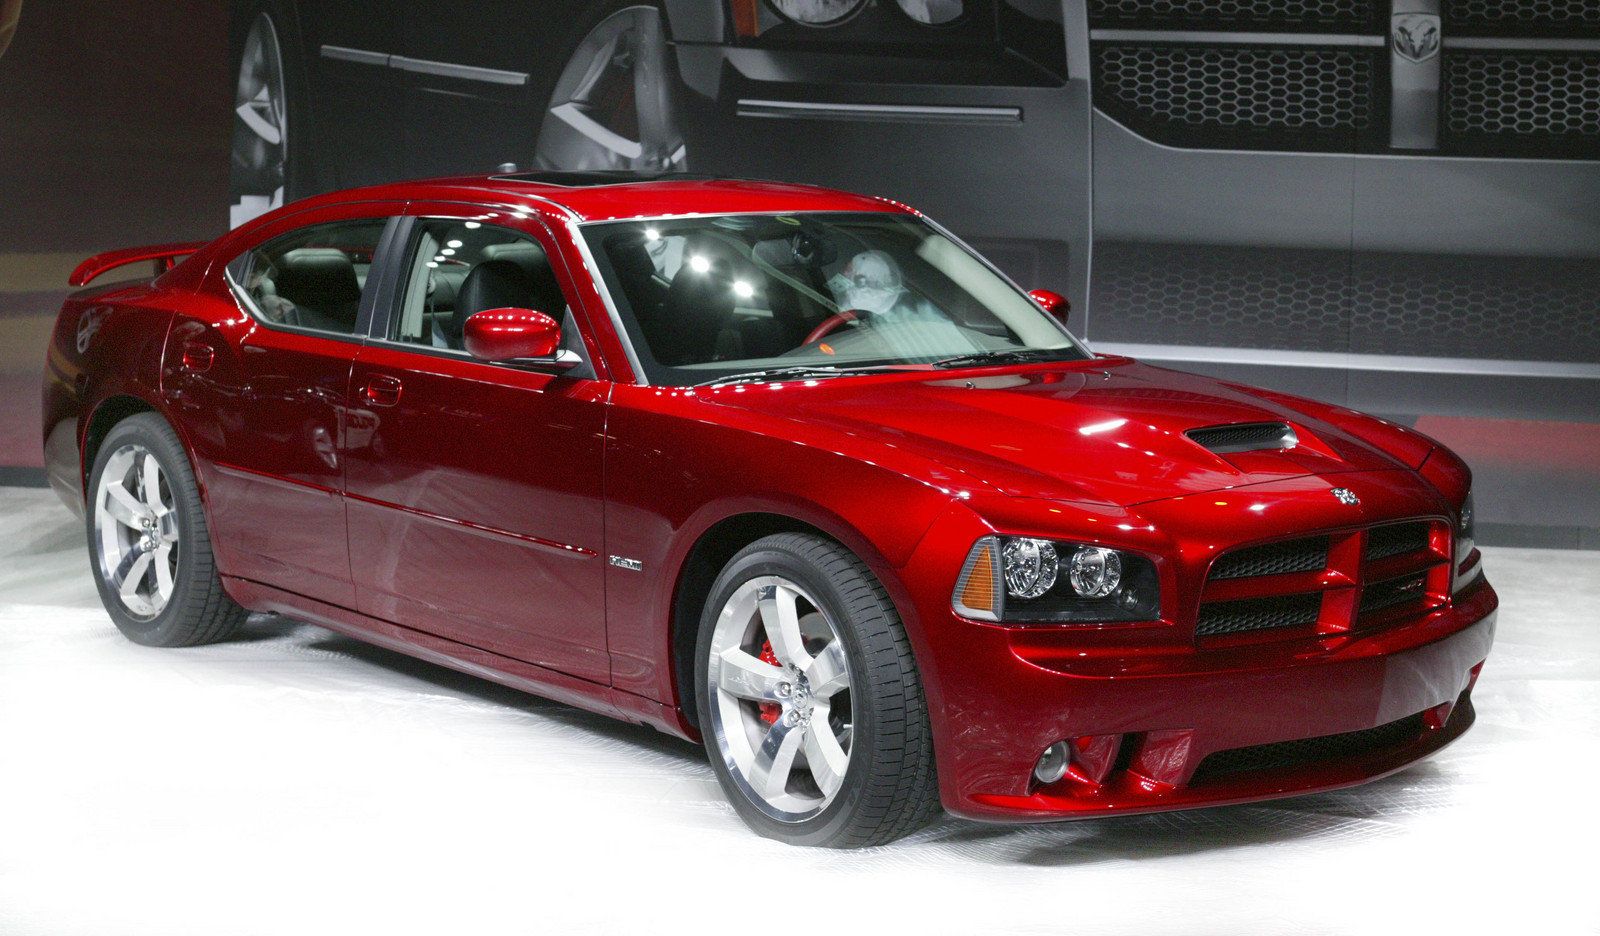 2008 Dodge Charger SRT8 0-60 Times, Top Speed, Specs, Quarter Mile, and  Wallpapers - MyCarSpecs United States / USA